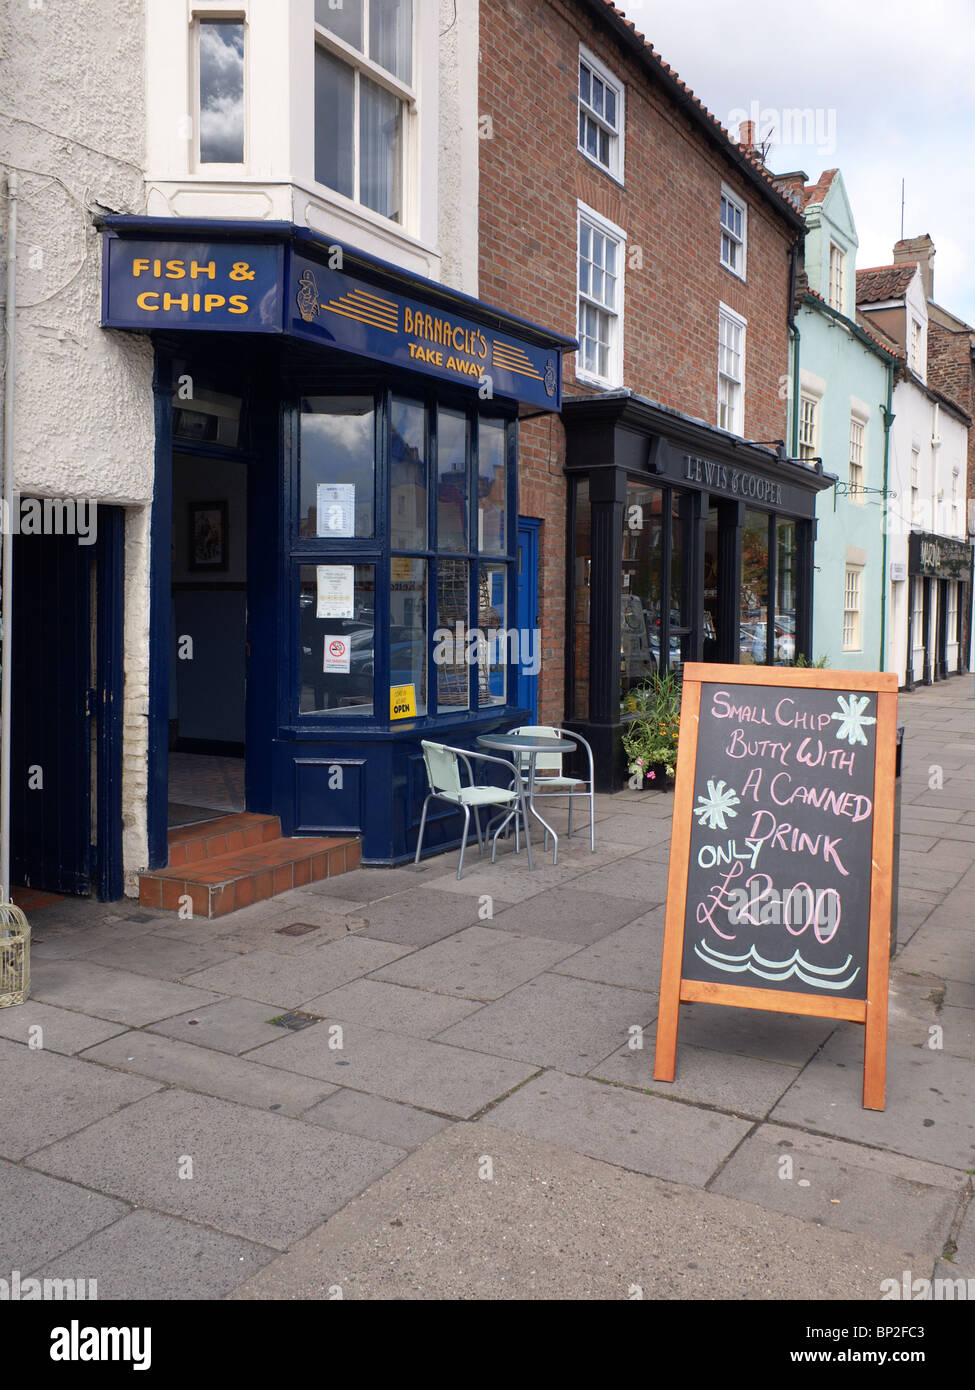 Fish and Chip shop in Yarm High Street with a sign for 'Chip Butty and a canned drink' Stock Photo